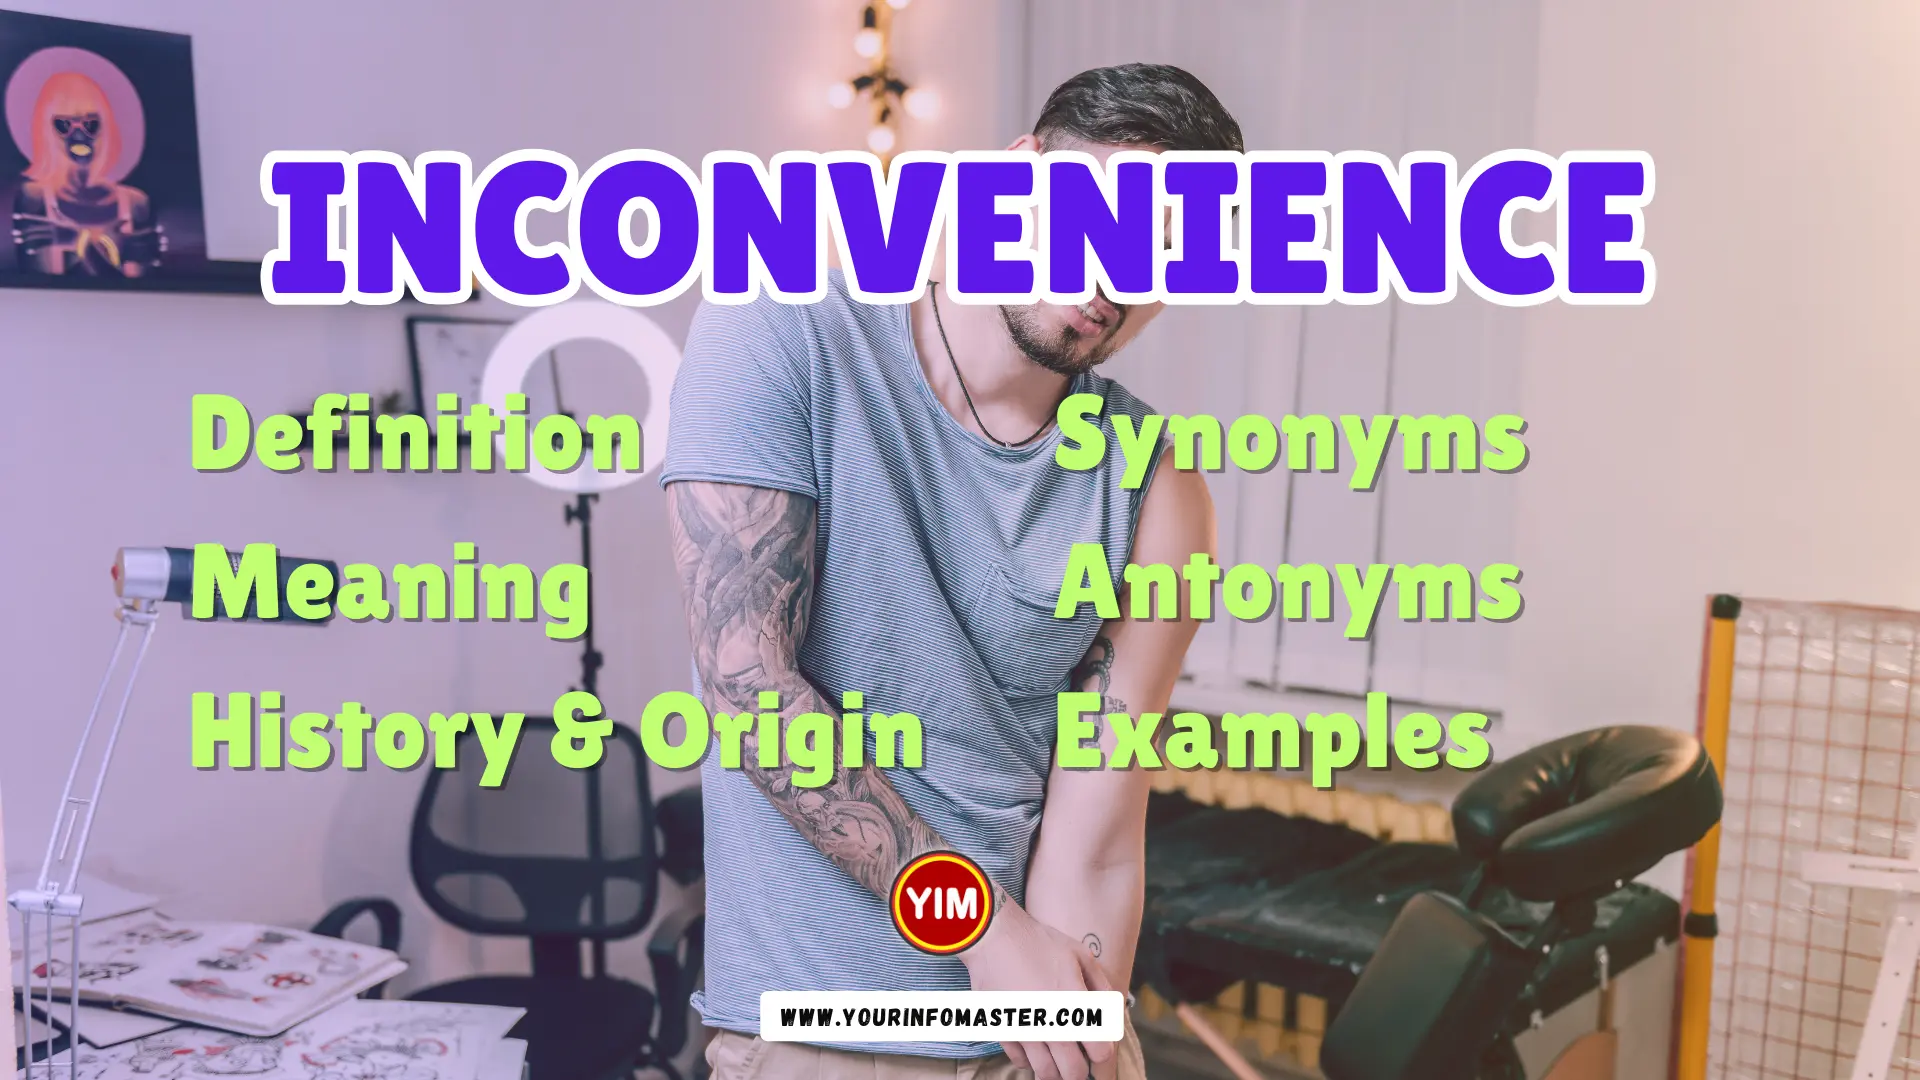 Inconvenience Synonyms, Antonyms, Example Sentences